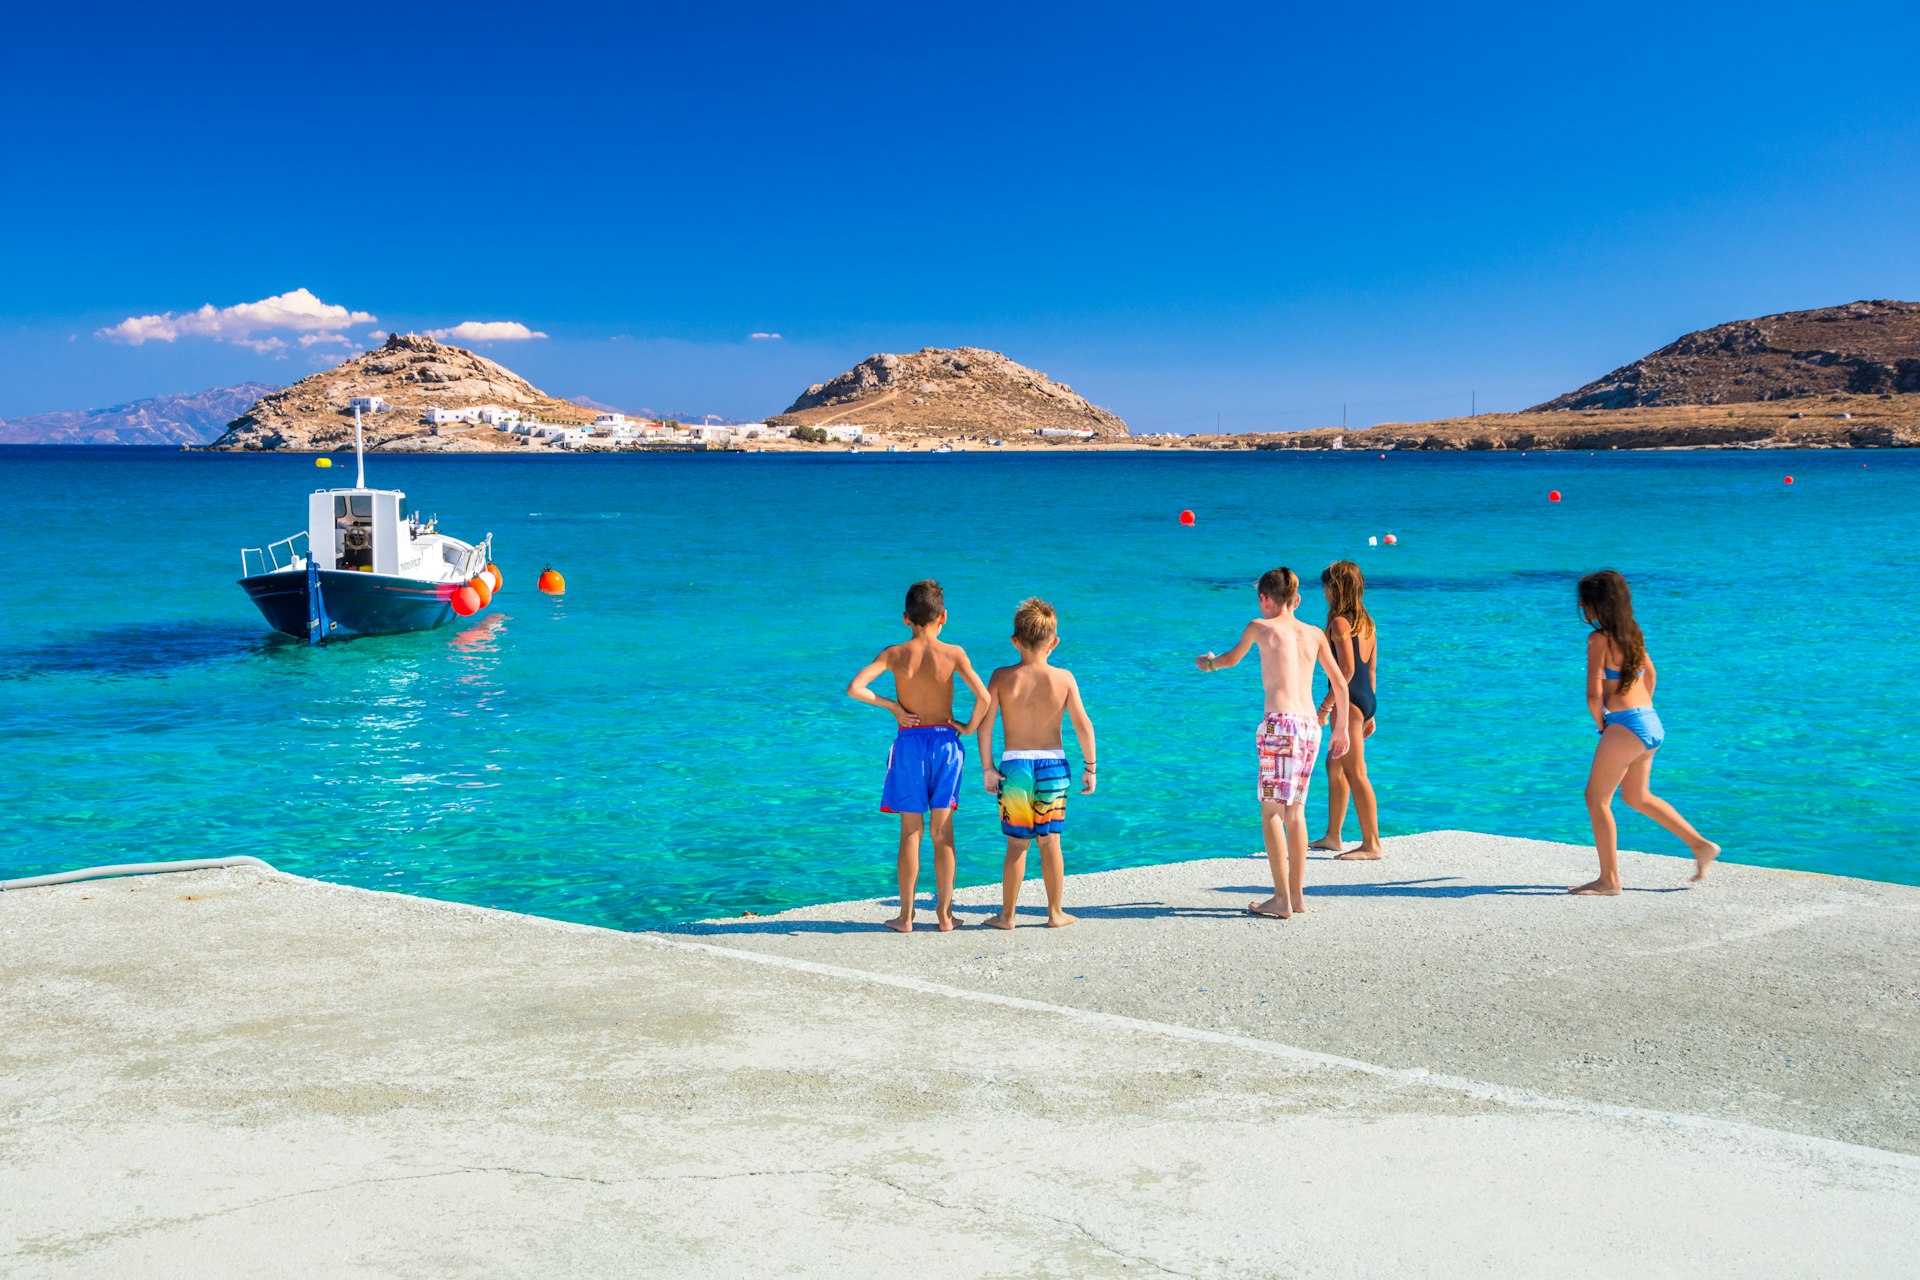 Group of kids preparing to jump into the sea from the pier at Kalafati Beach on Mykonos island